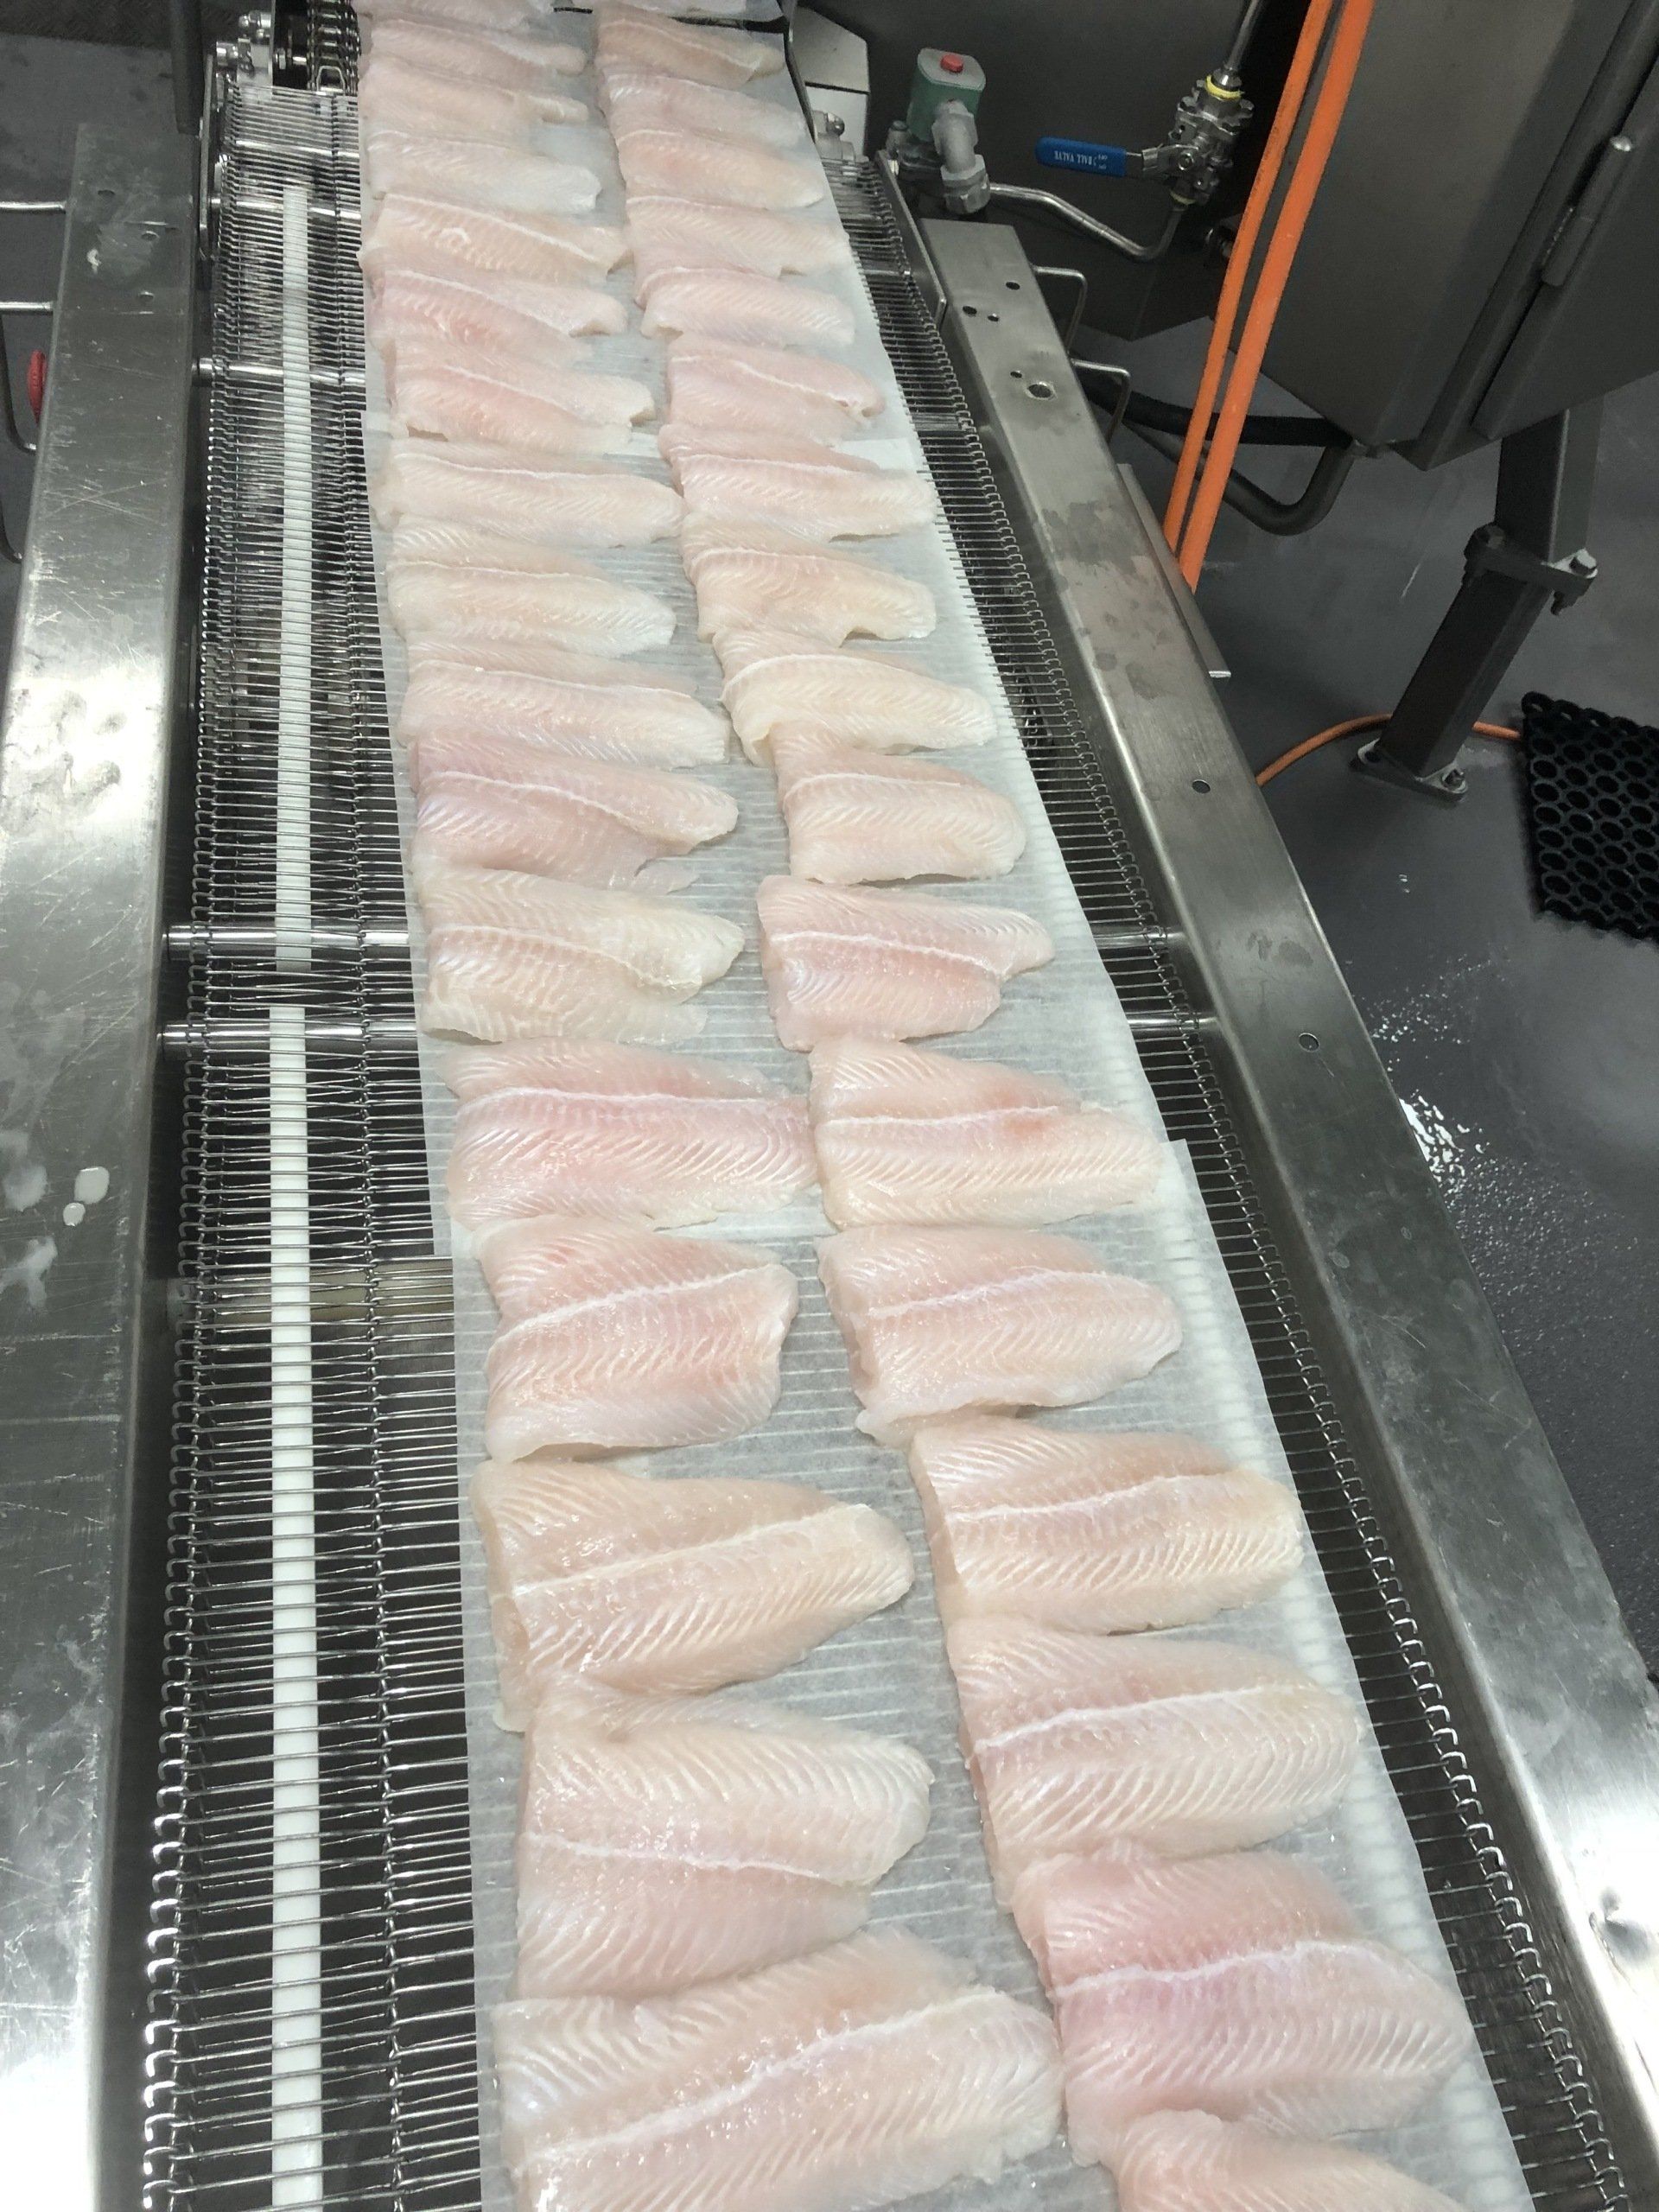 Bass Fillet moving to the RTE oven. - Bayview Foods